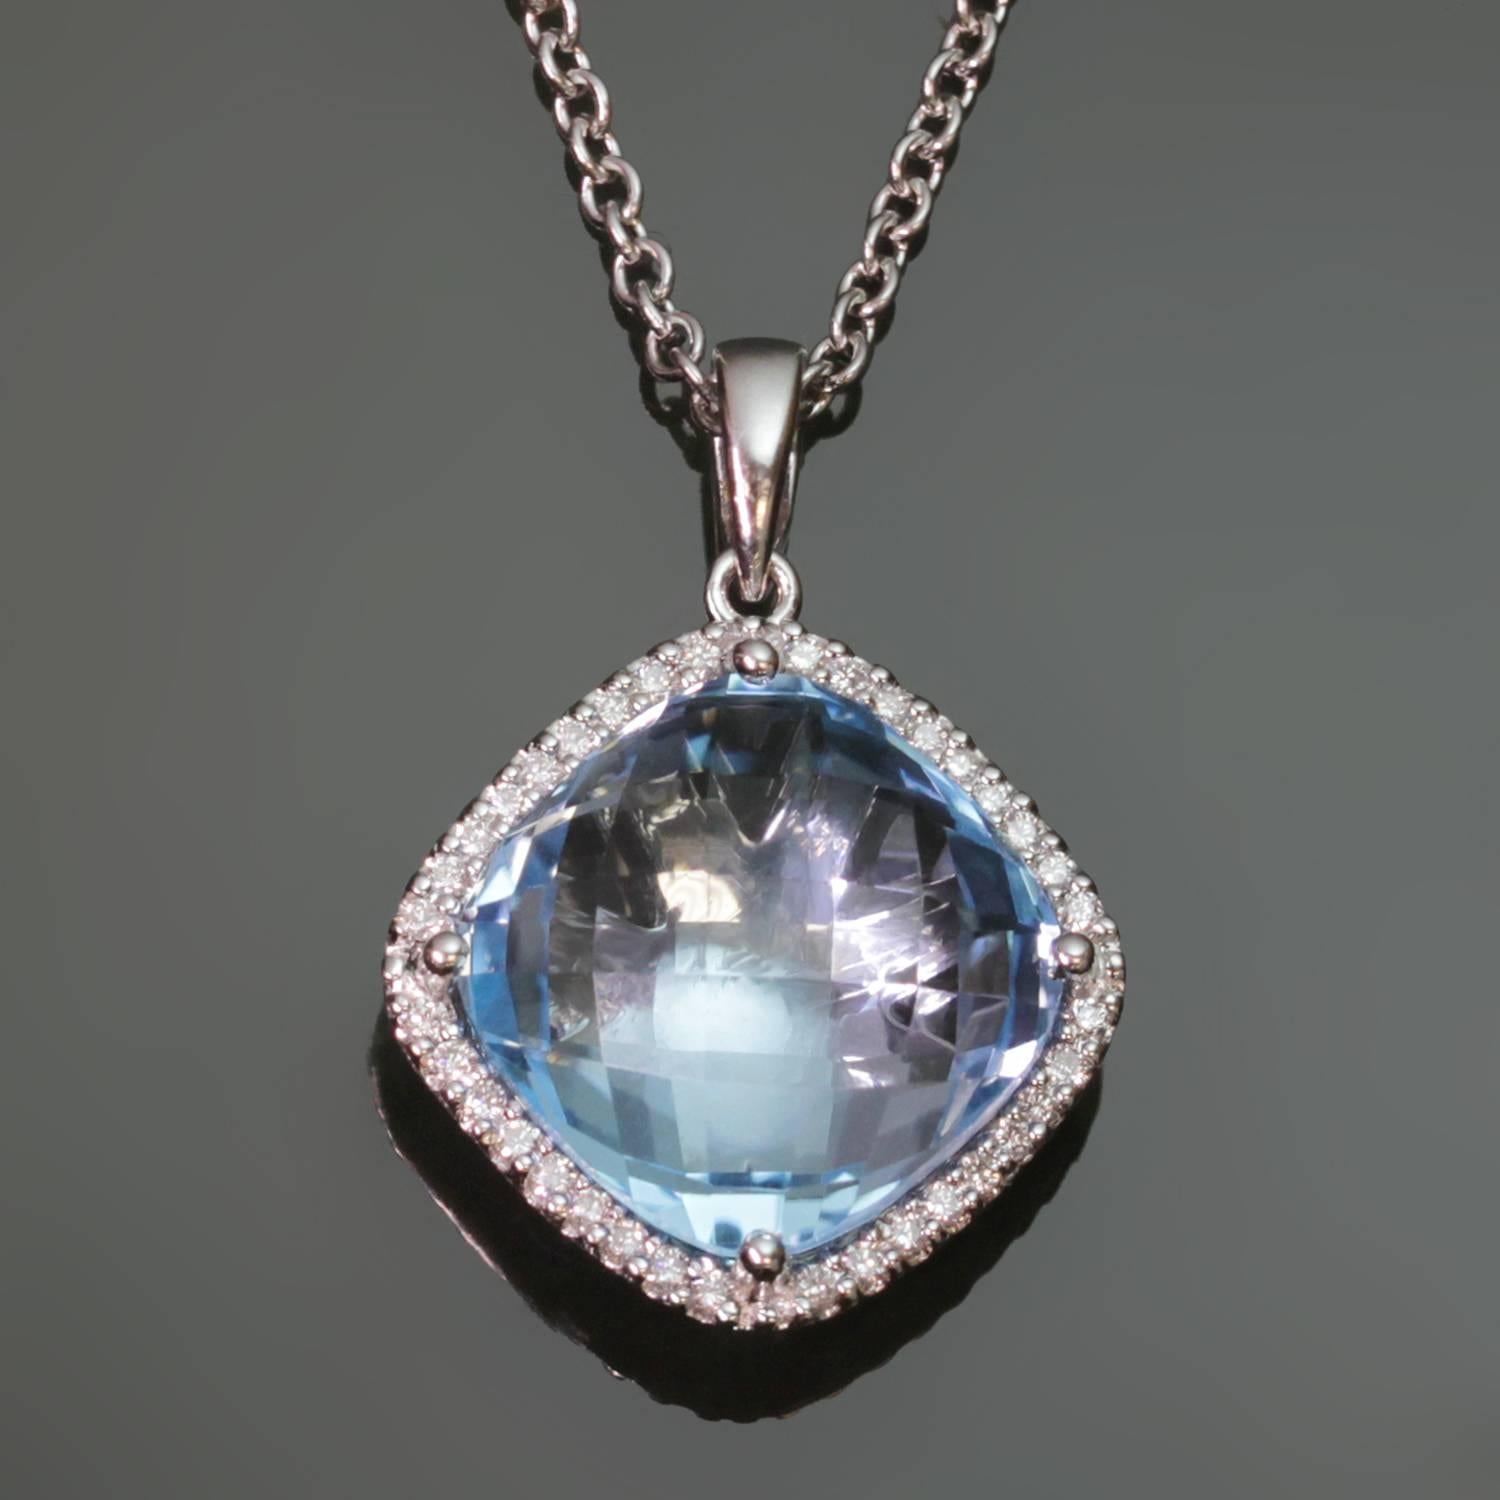 This modern sparkling pendant features a lazer-cut 11.0mm blue topaz surrounded by a row of brilliant-cut round diamonds set in 18k white gold. Completed by a 14k white gold chain.  Measurements: 16mm (5/8